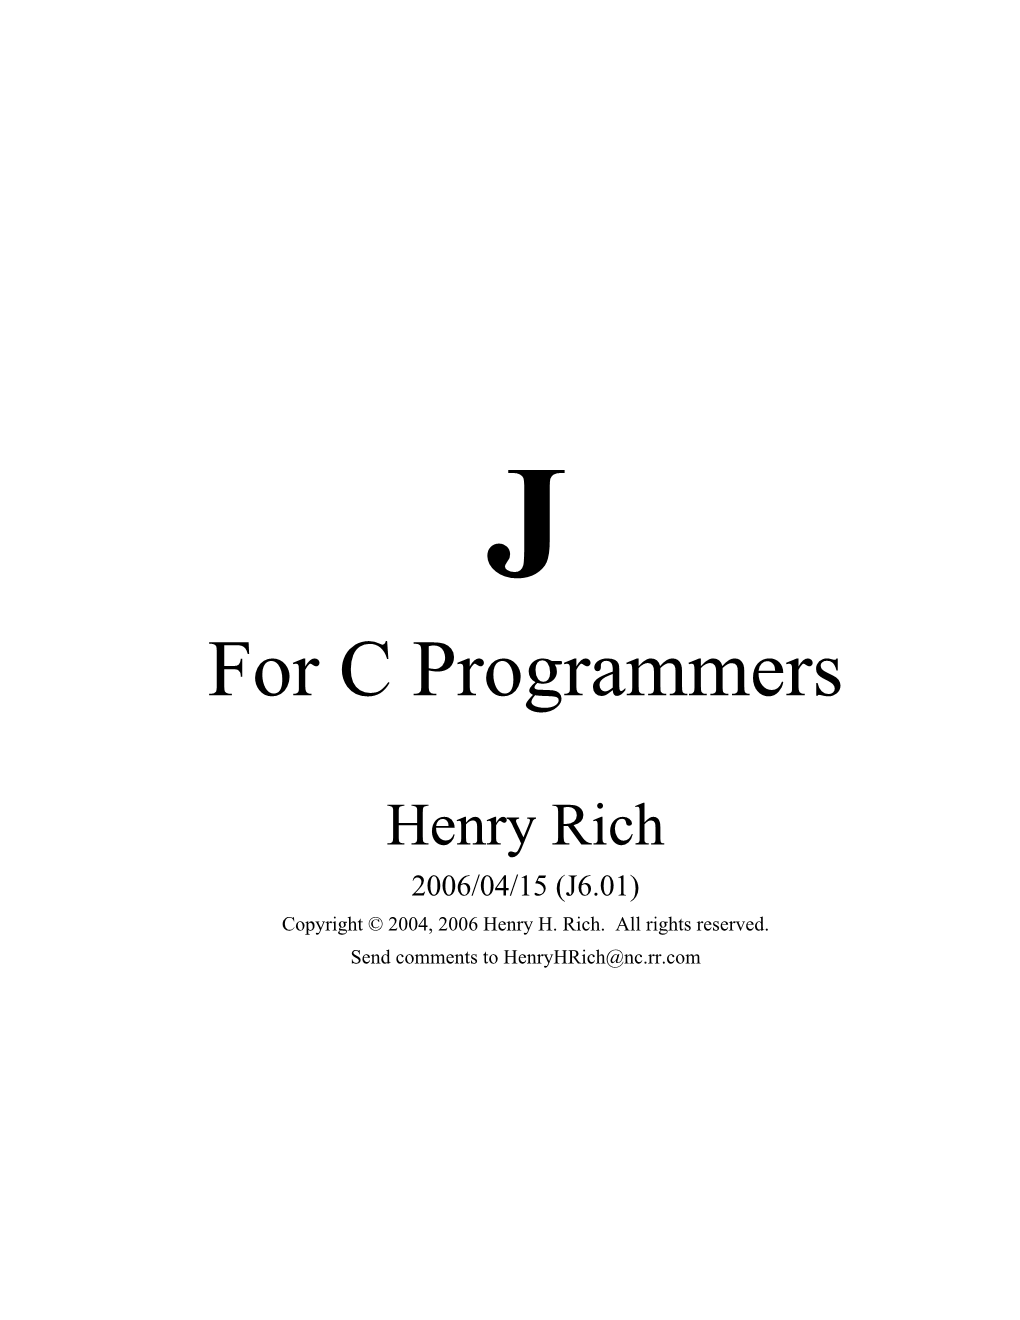 For C Programmers